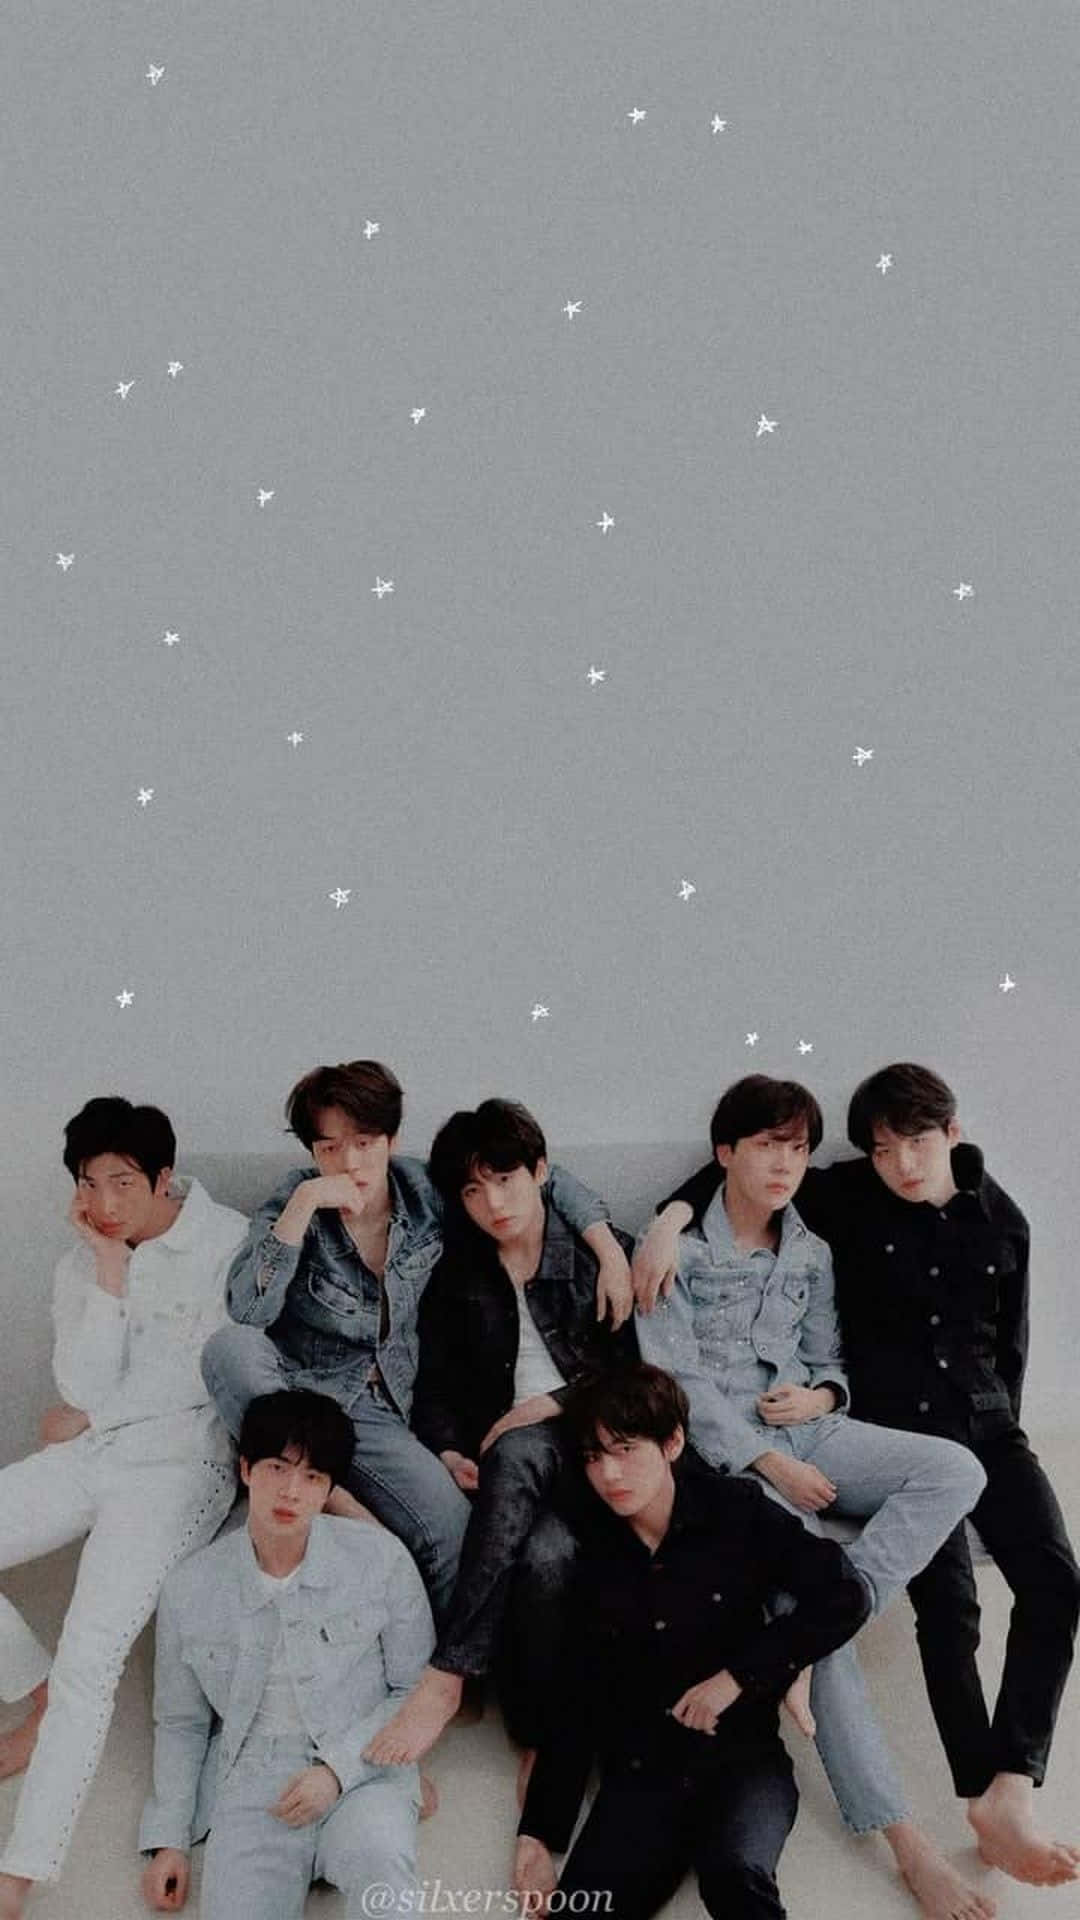 Starry Bts Iphone Background